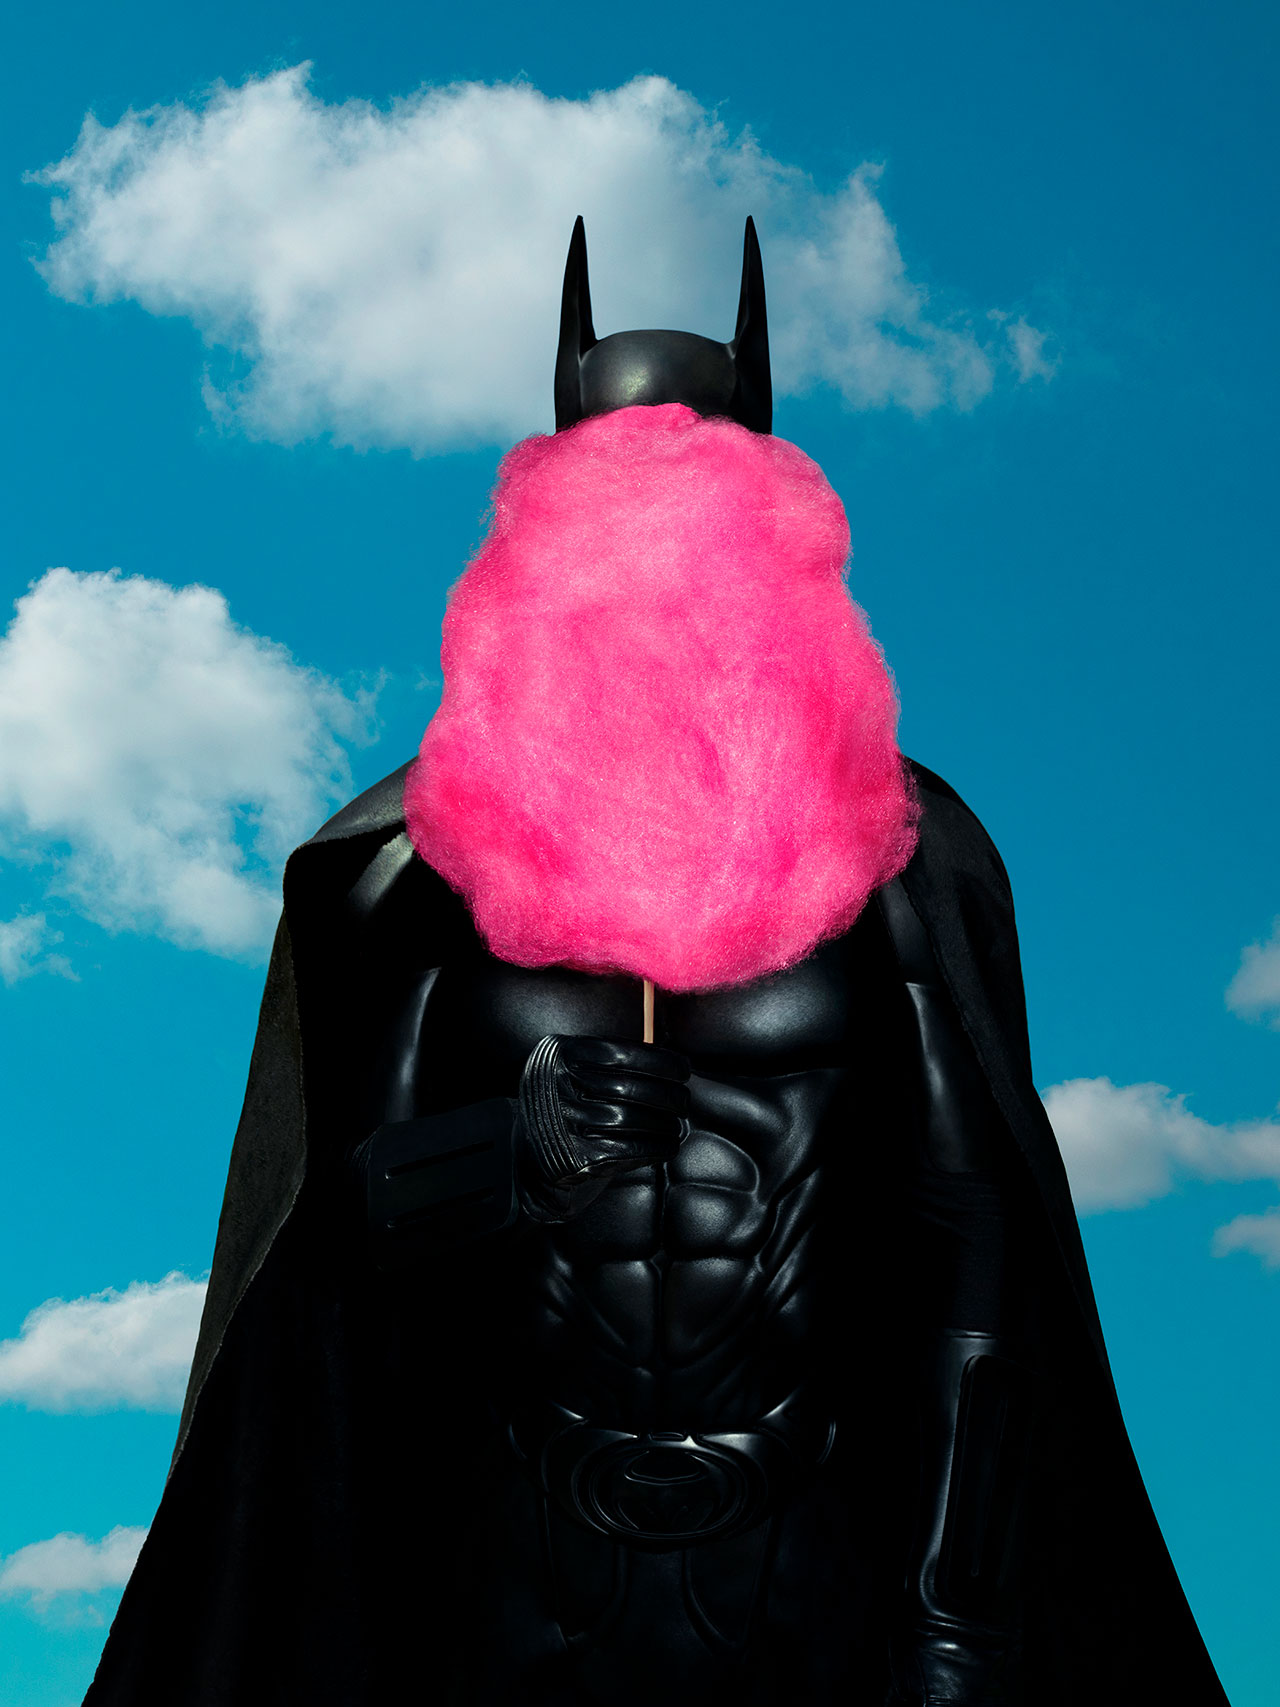 Batman Takes Some Time Off in Sebastian Magnani's Whimsical Photographic  Series | Yatzer